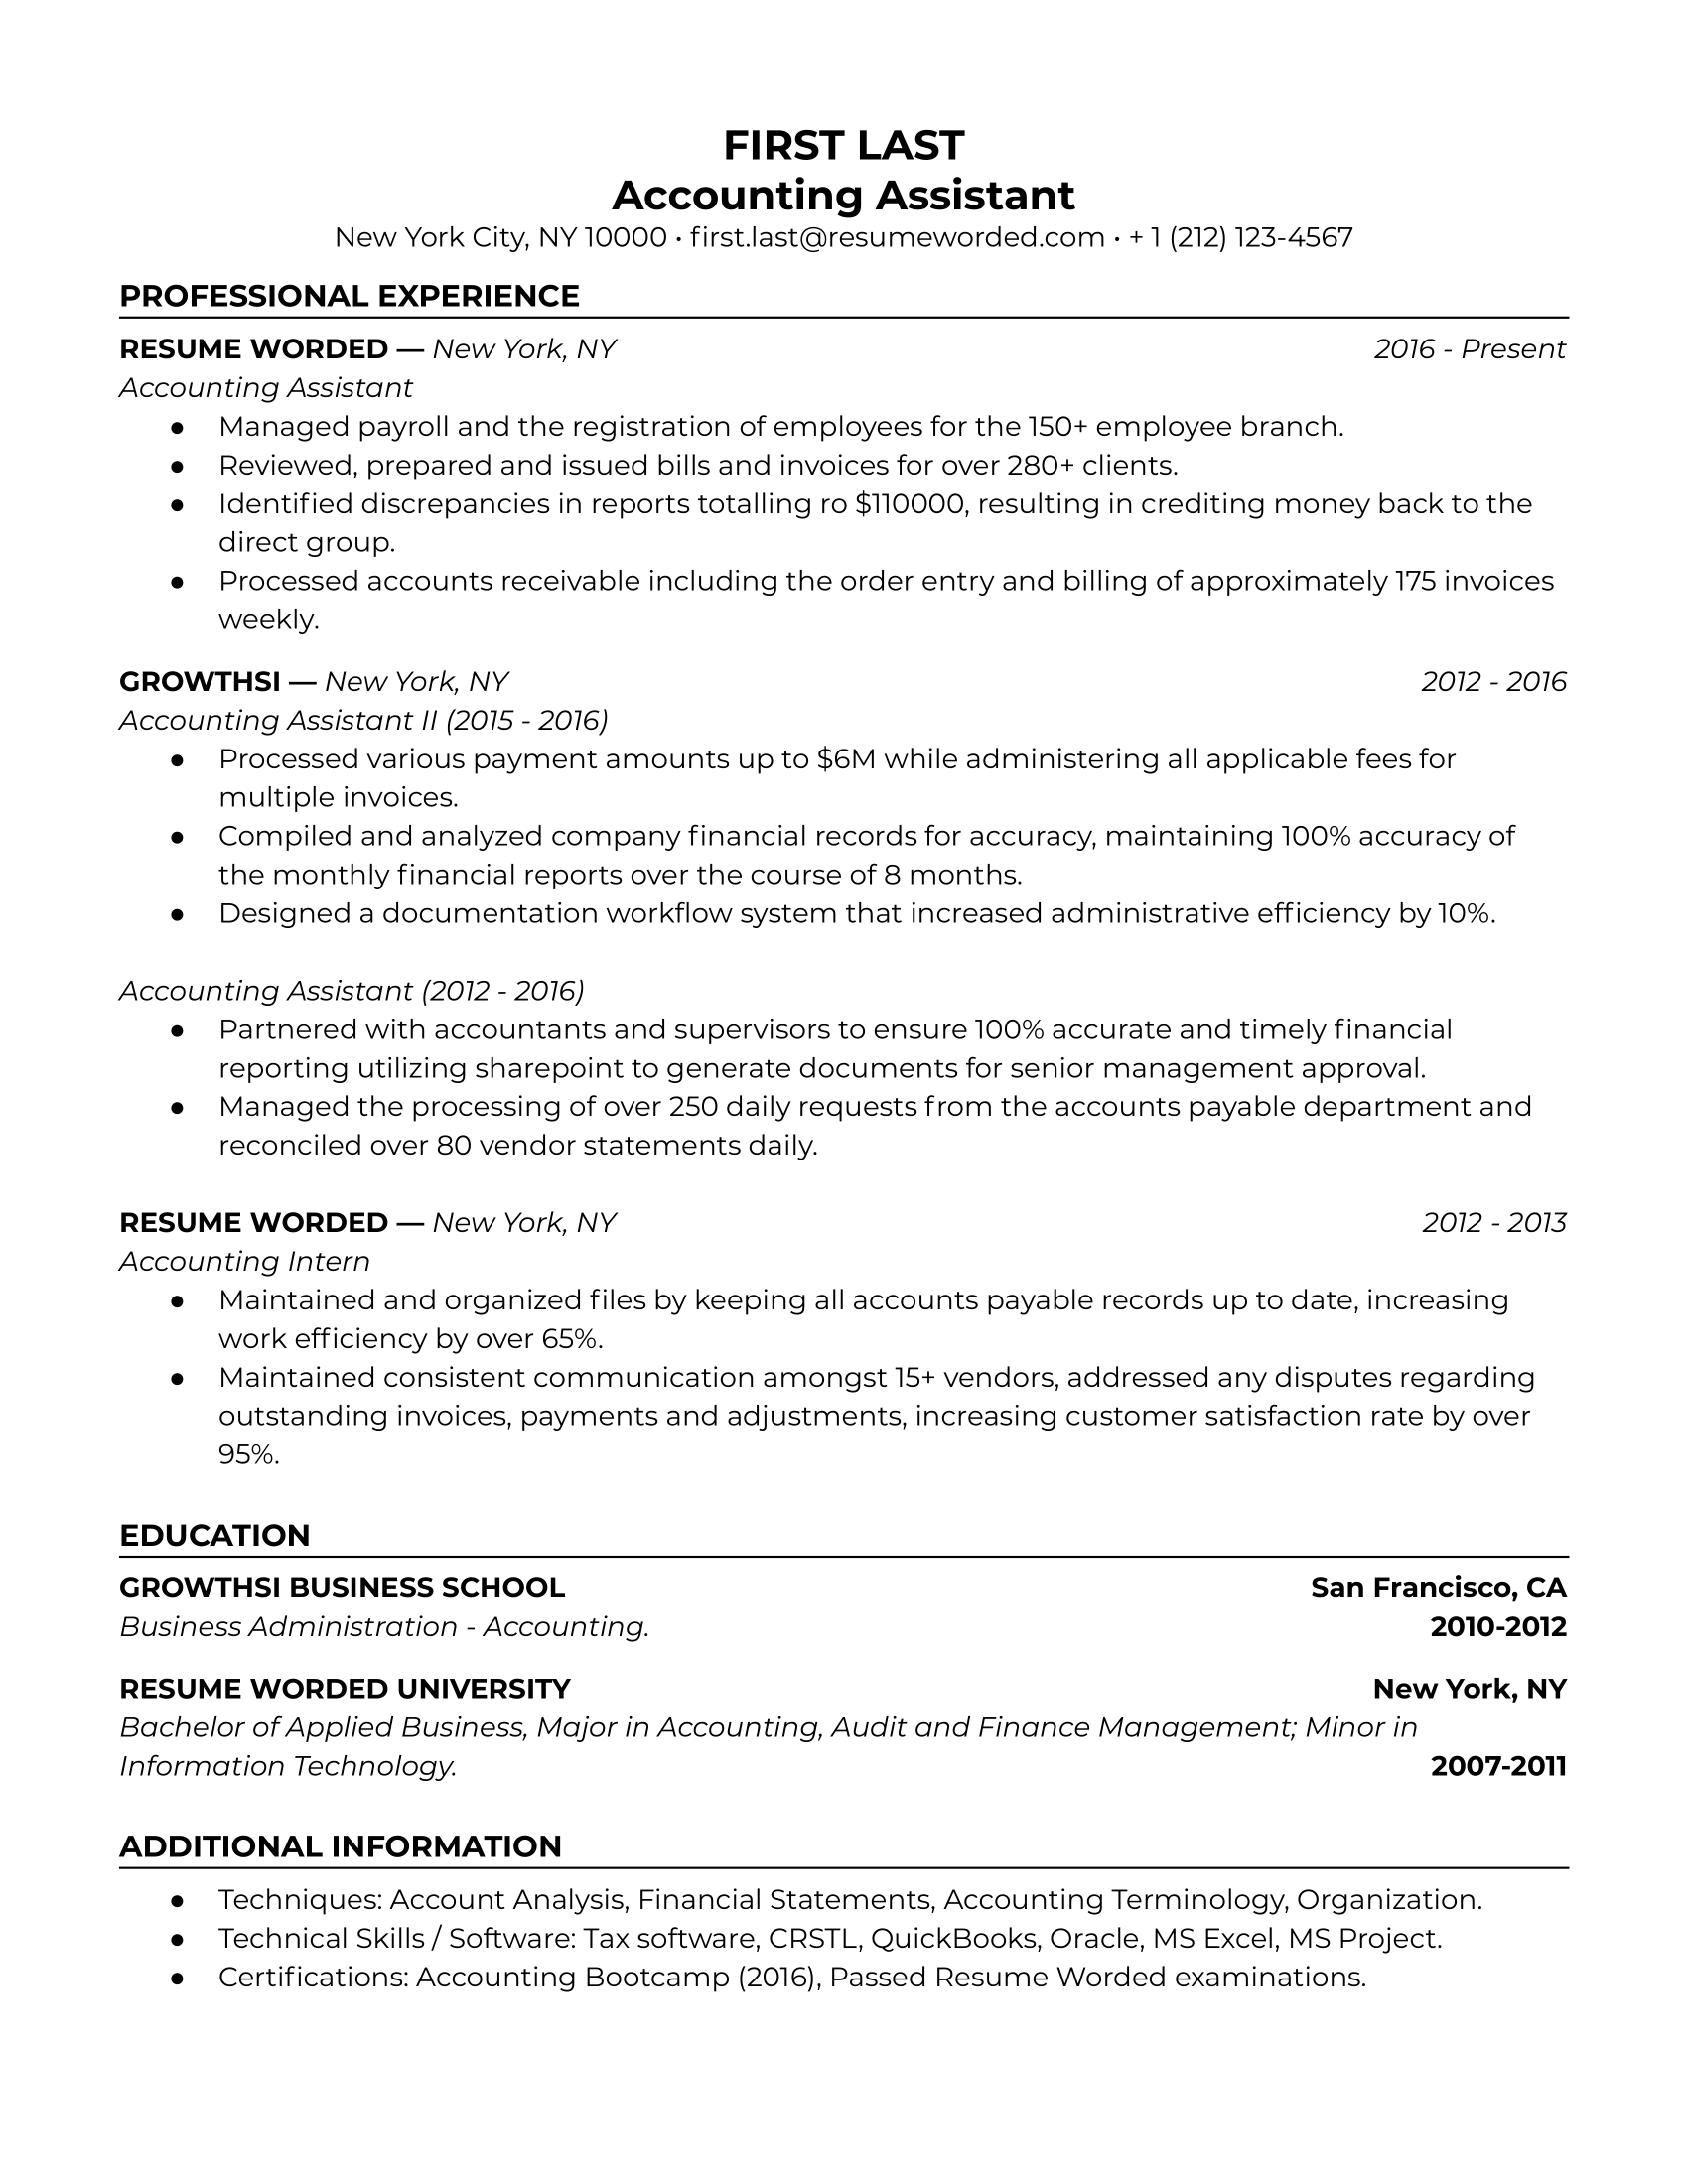 Accounting Assistant Resume Sample